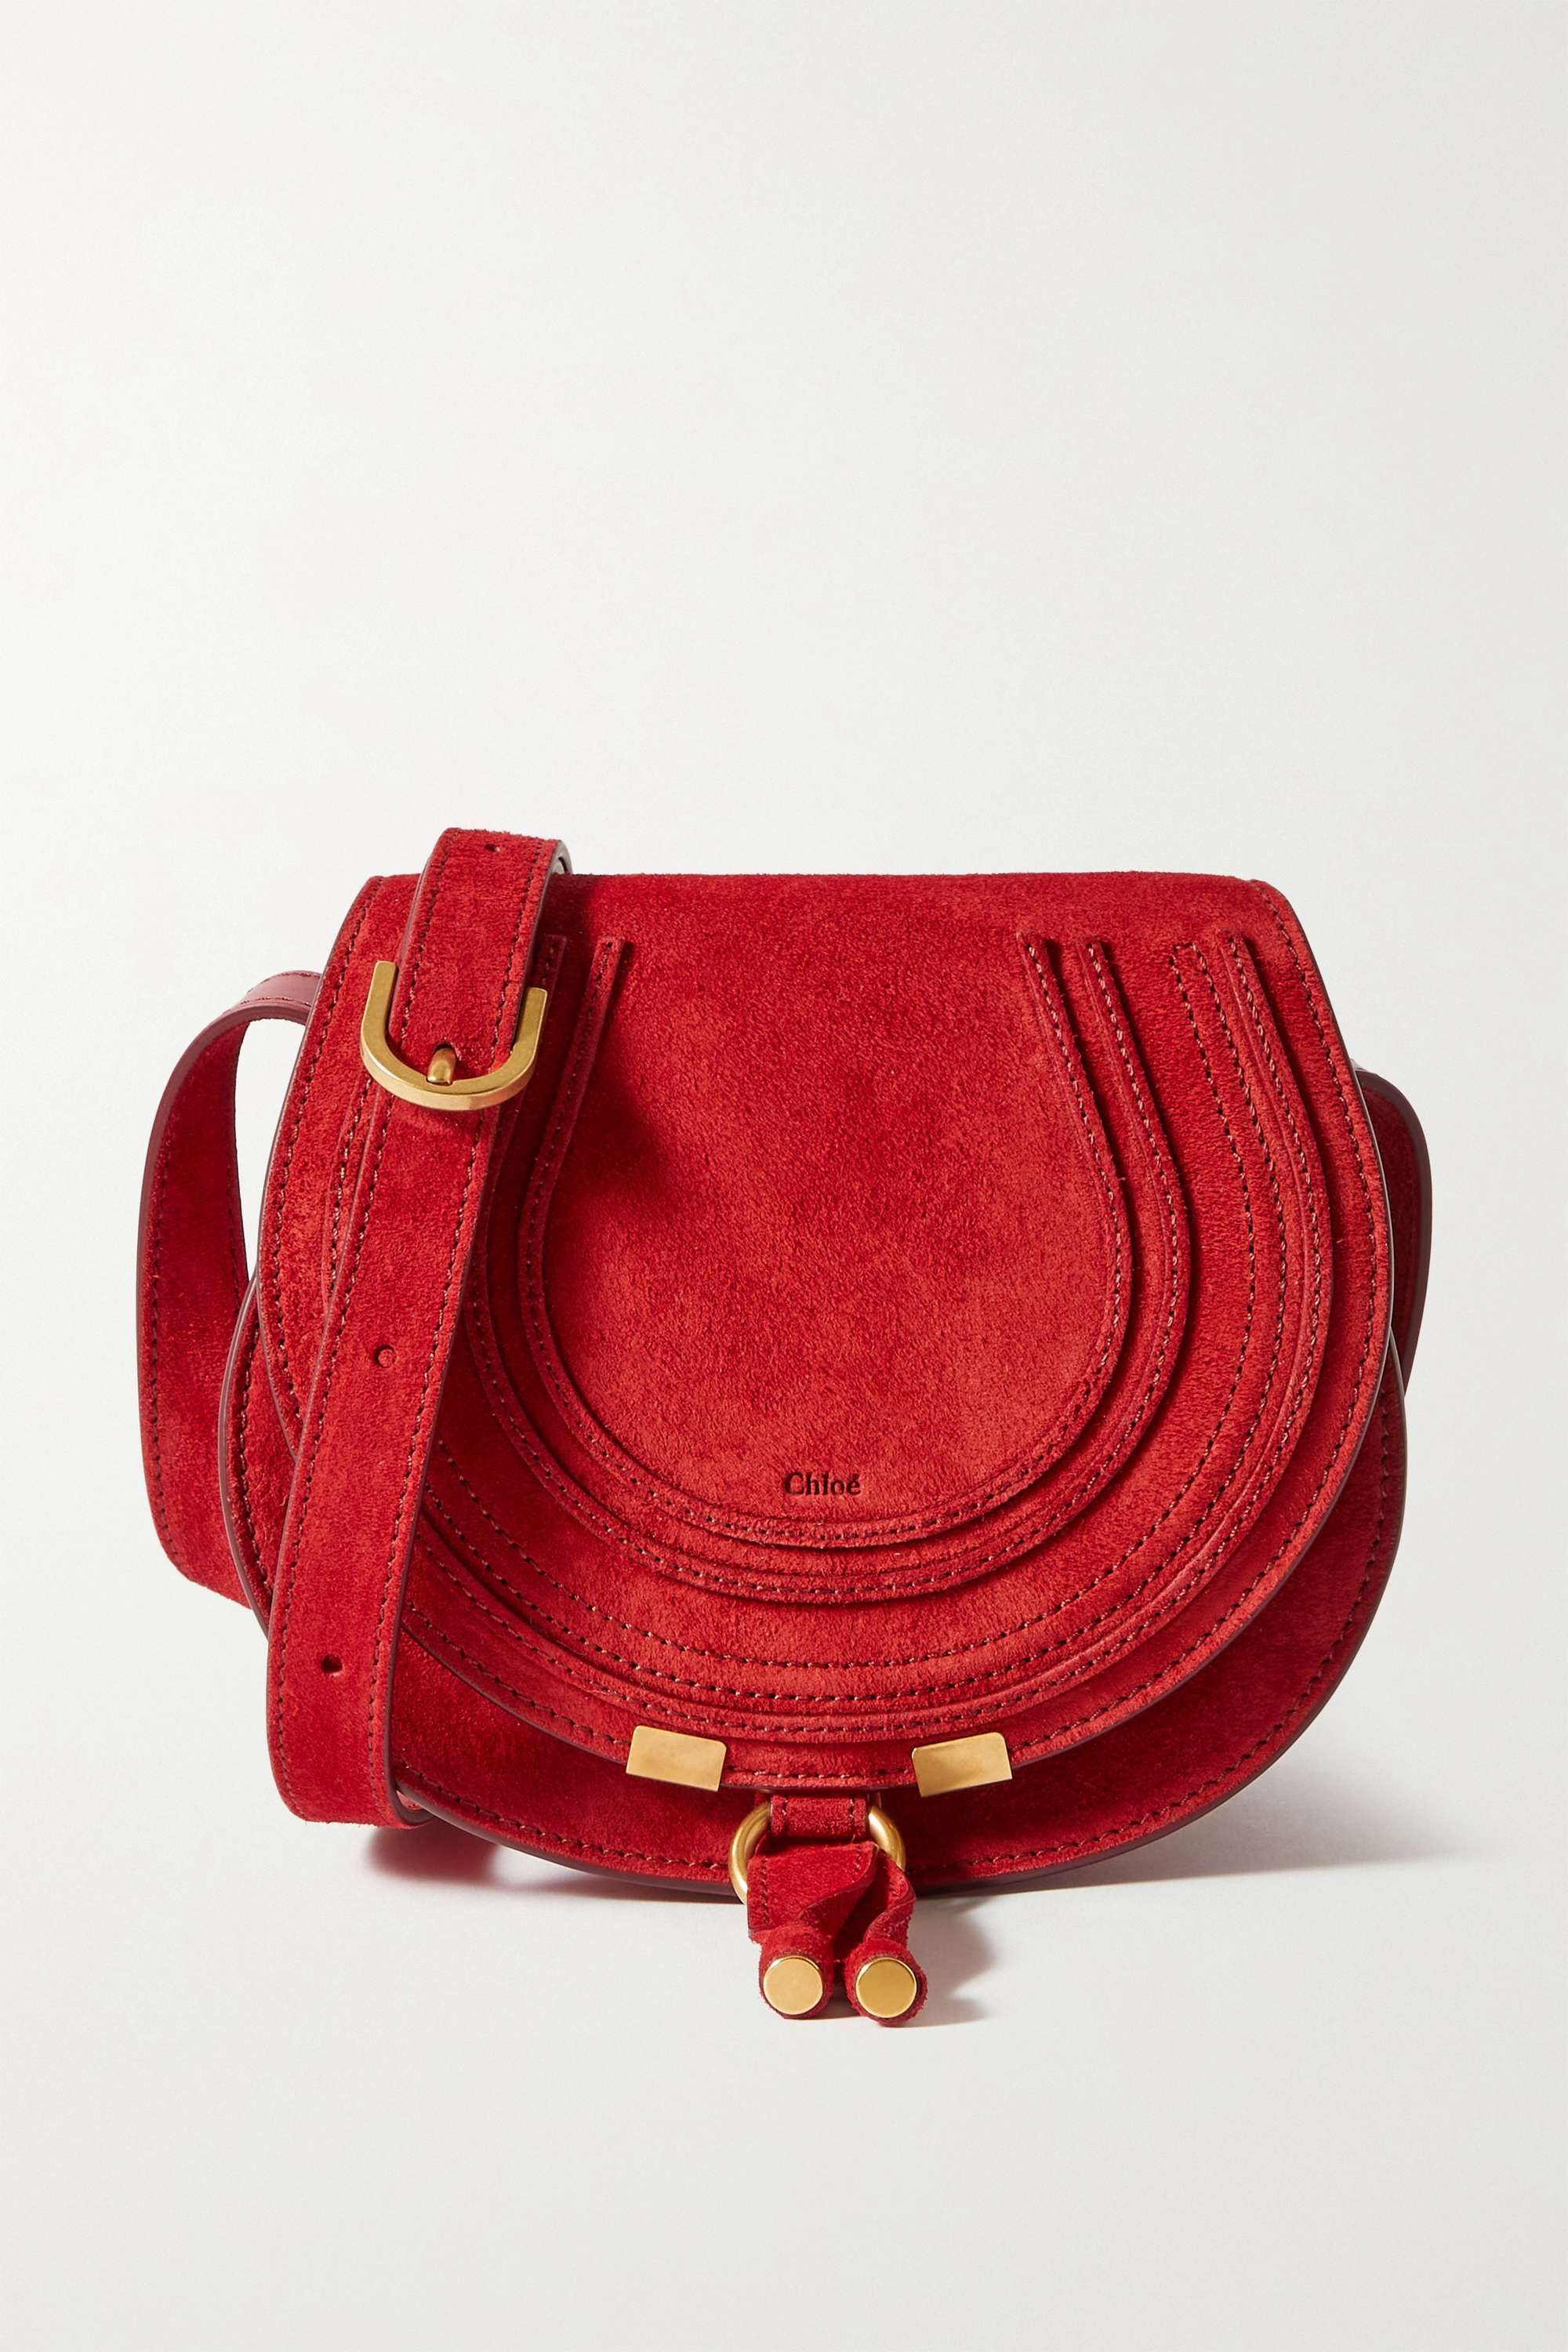 10 Red Designer Bags To Shop | Preview.ph